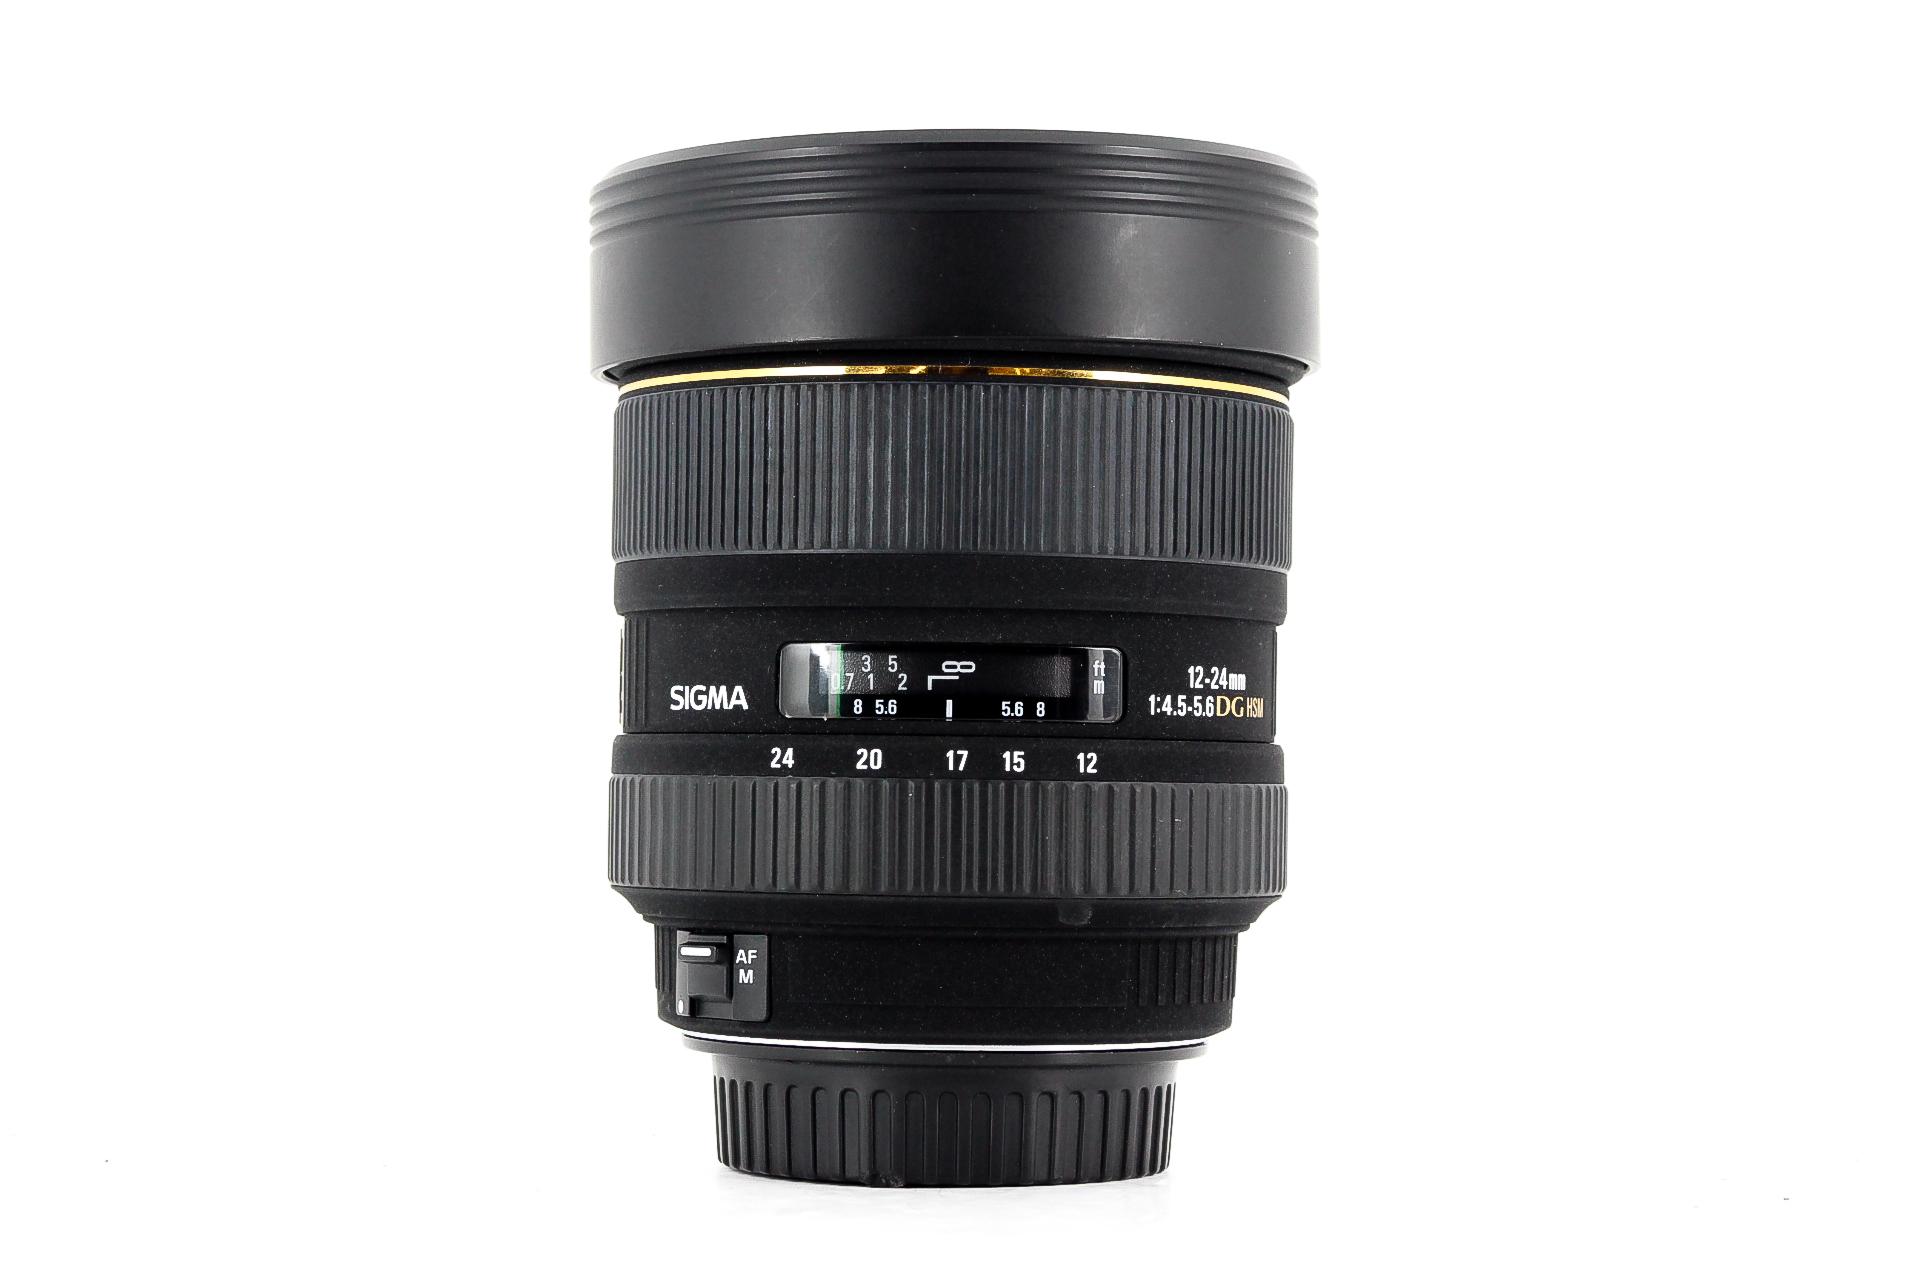 Sigma 12-24mm f/4.5-5.6 EX DG, Canon EF Fit Lens - Lenses and Cameras